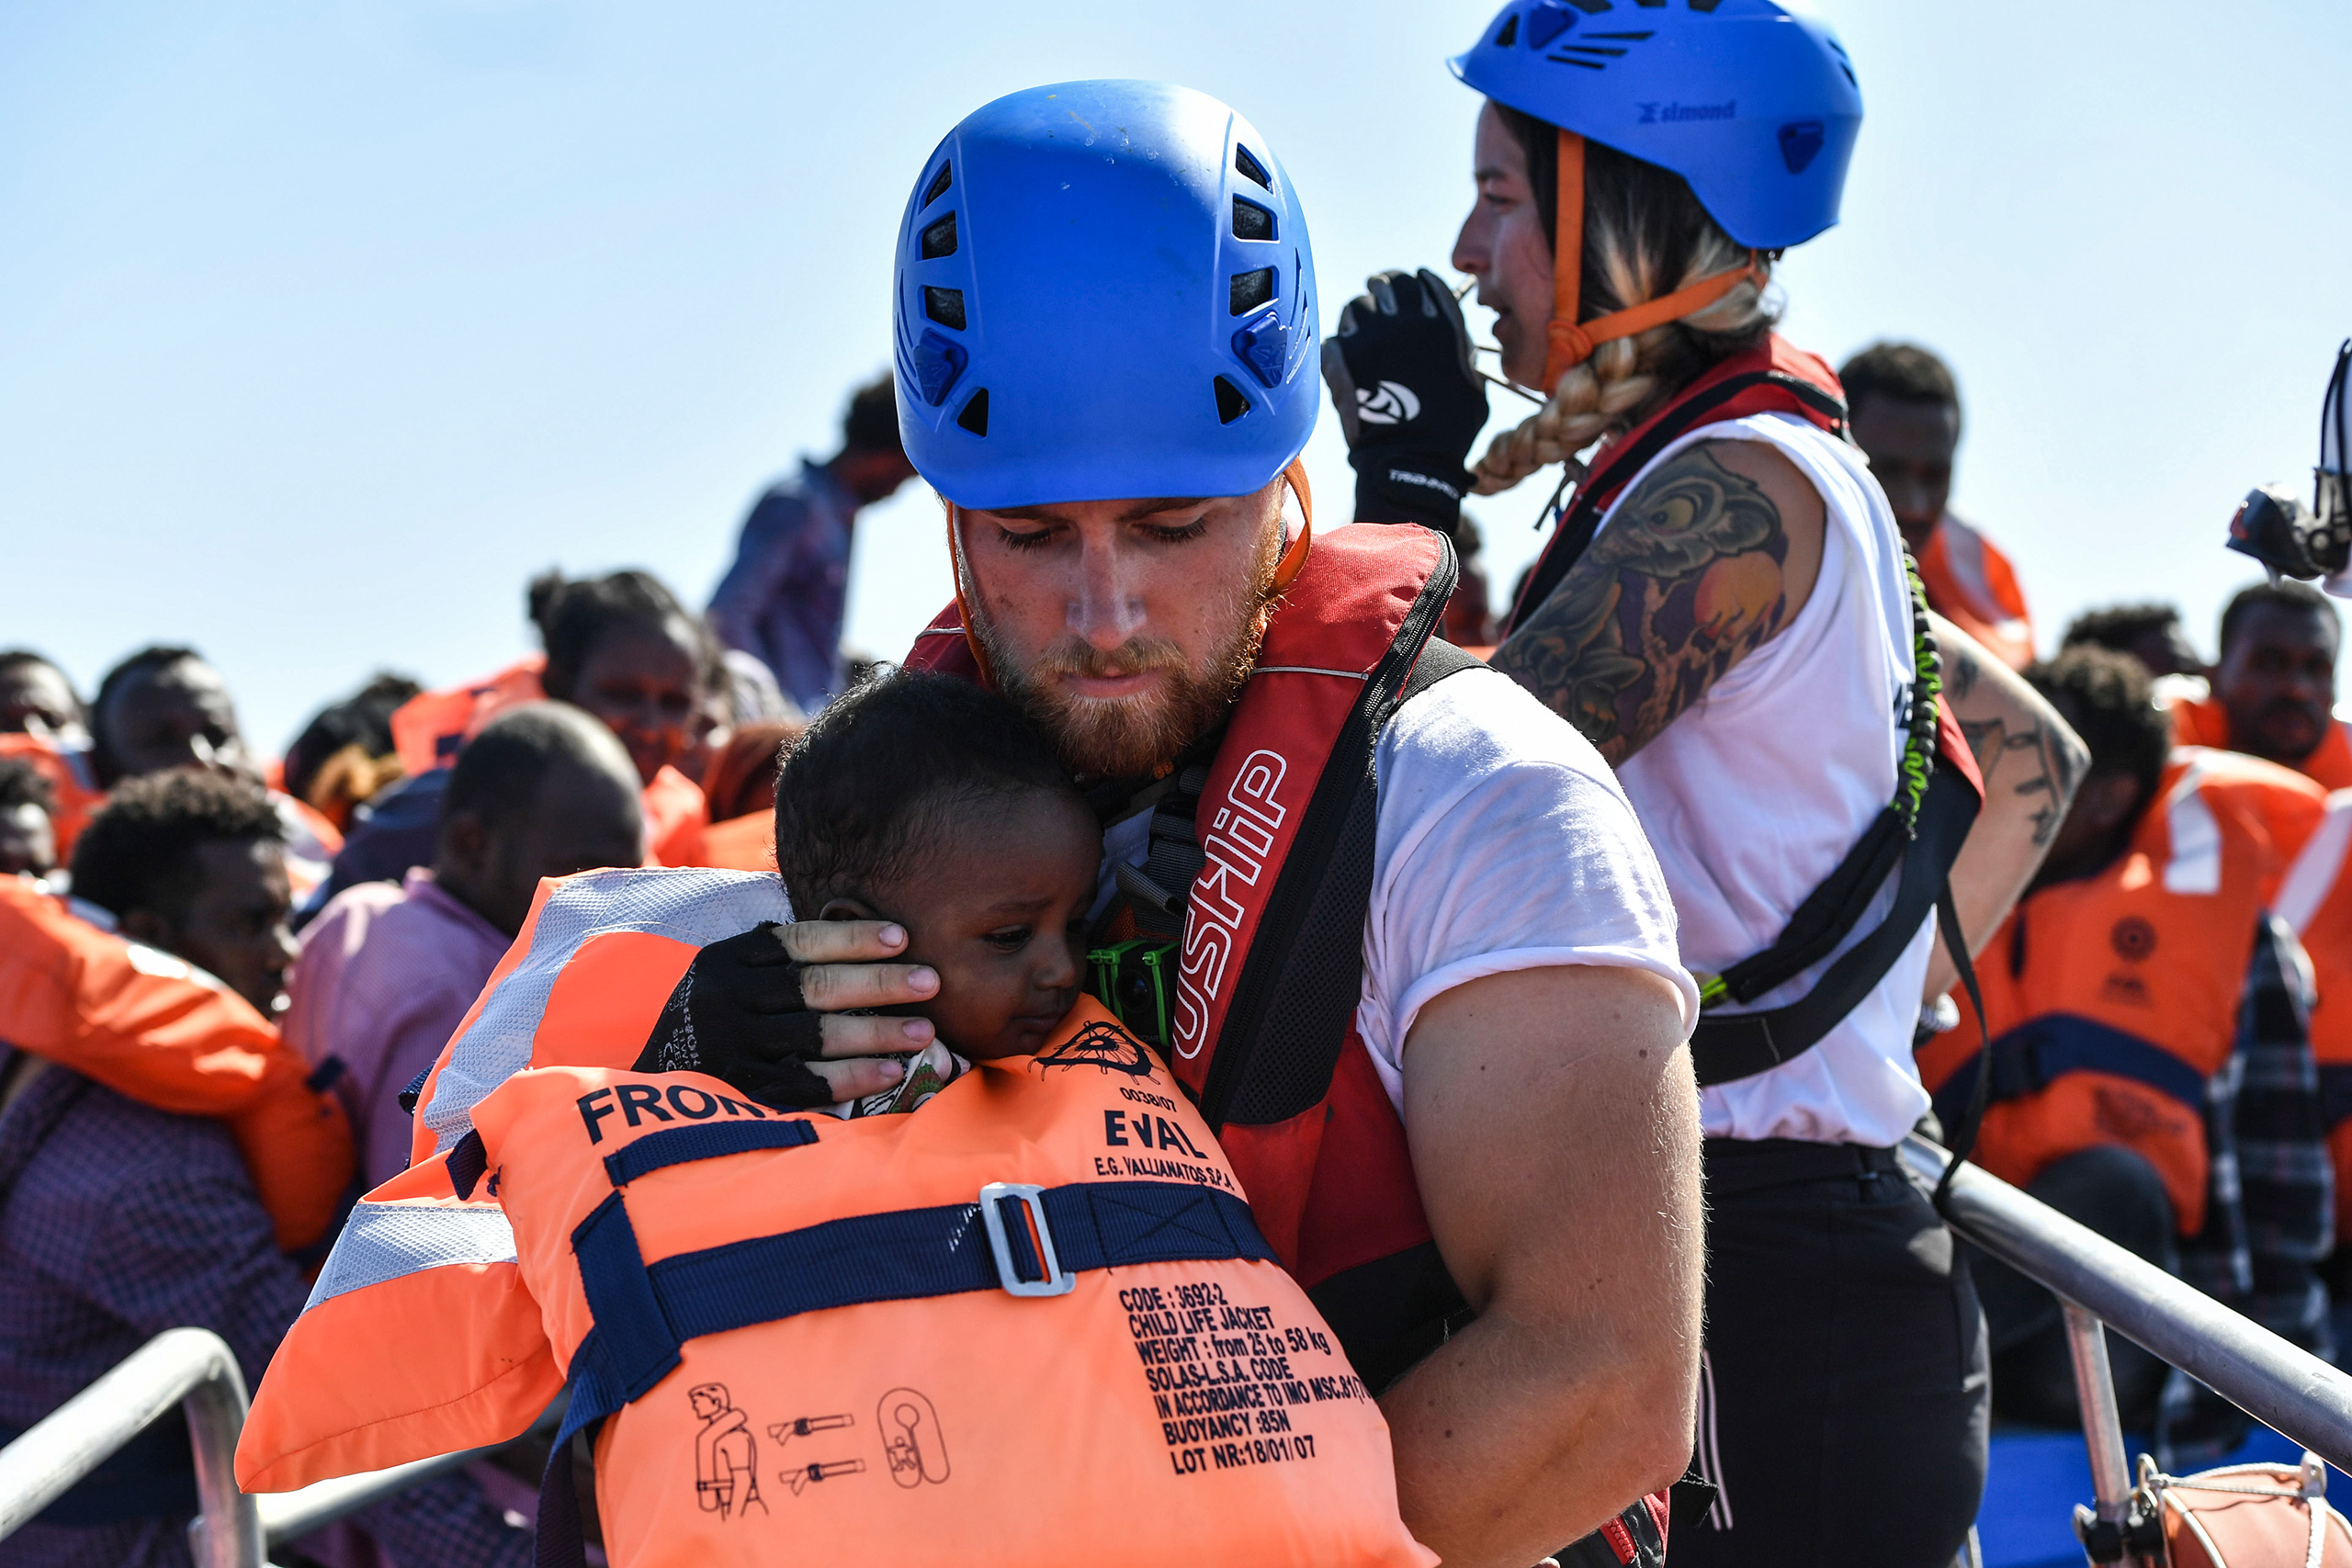 A rescue worker cradles a young child to safety, Aug. 21, 2016.